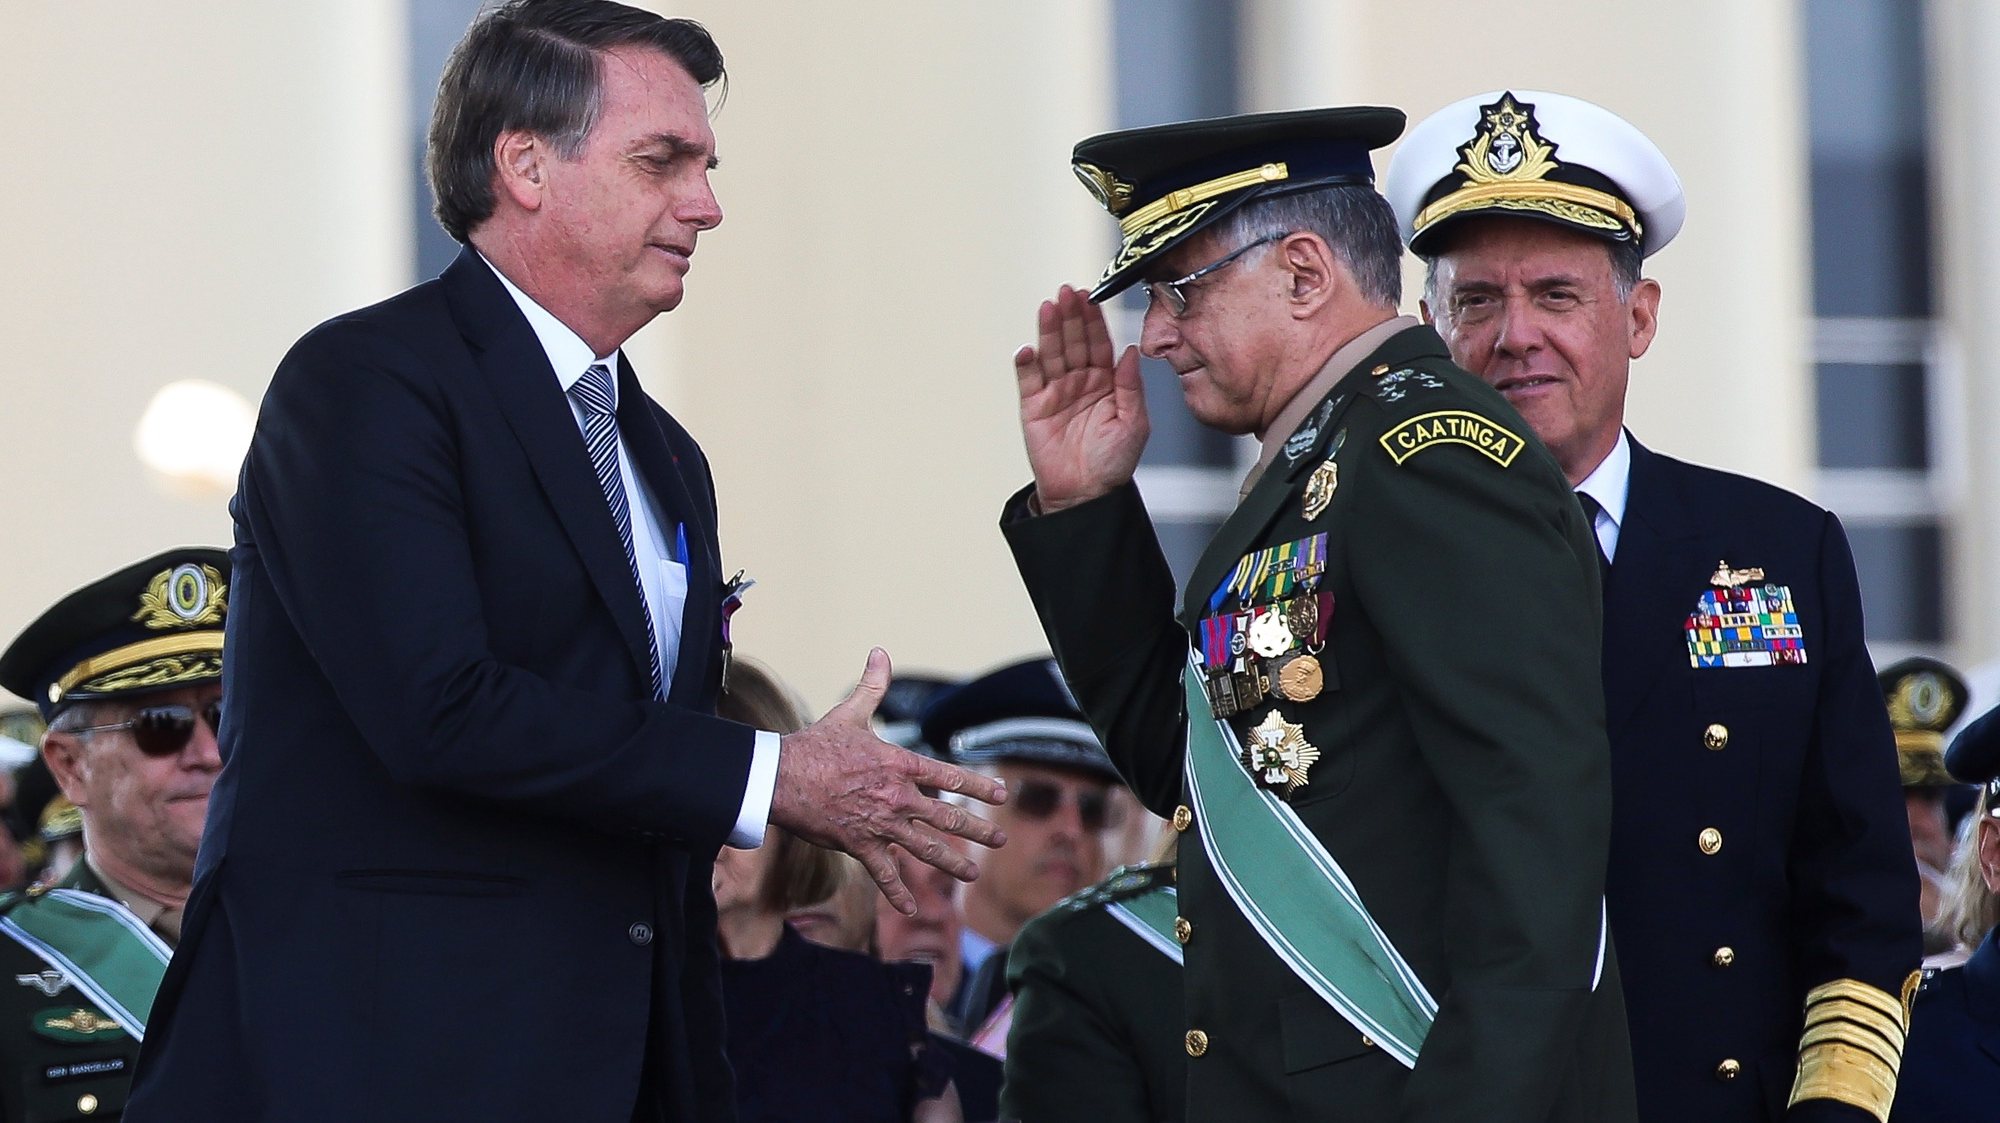 epa09107246 A handout photo made available by Agencia Brasil shows Brazilian President Jair Bolsonaro (L) about to shake hands with the Army&#039;s General Edson Leal Pujol (C) during a ceremony in Brasilia, Brazil, 23 August 2019 (reissued 30 March 2021). The heads of the Brazilian Army, Navy and Aviation &#039;will be replaced,&#039; official sources reported on 30 March 2021, a day after President Bolsonaro announced six changes in his cabinet, which included the departure of the Defense Minister.  EPA/Antonio Cruz/Agencia Brasil HANDOUT  HANDOUT EDITORIAL USE ONLY/NO SALES